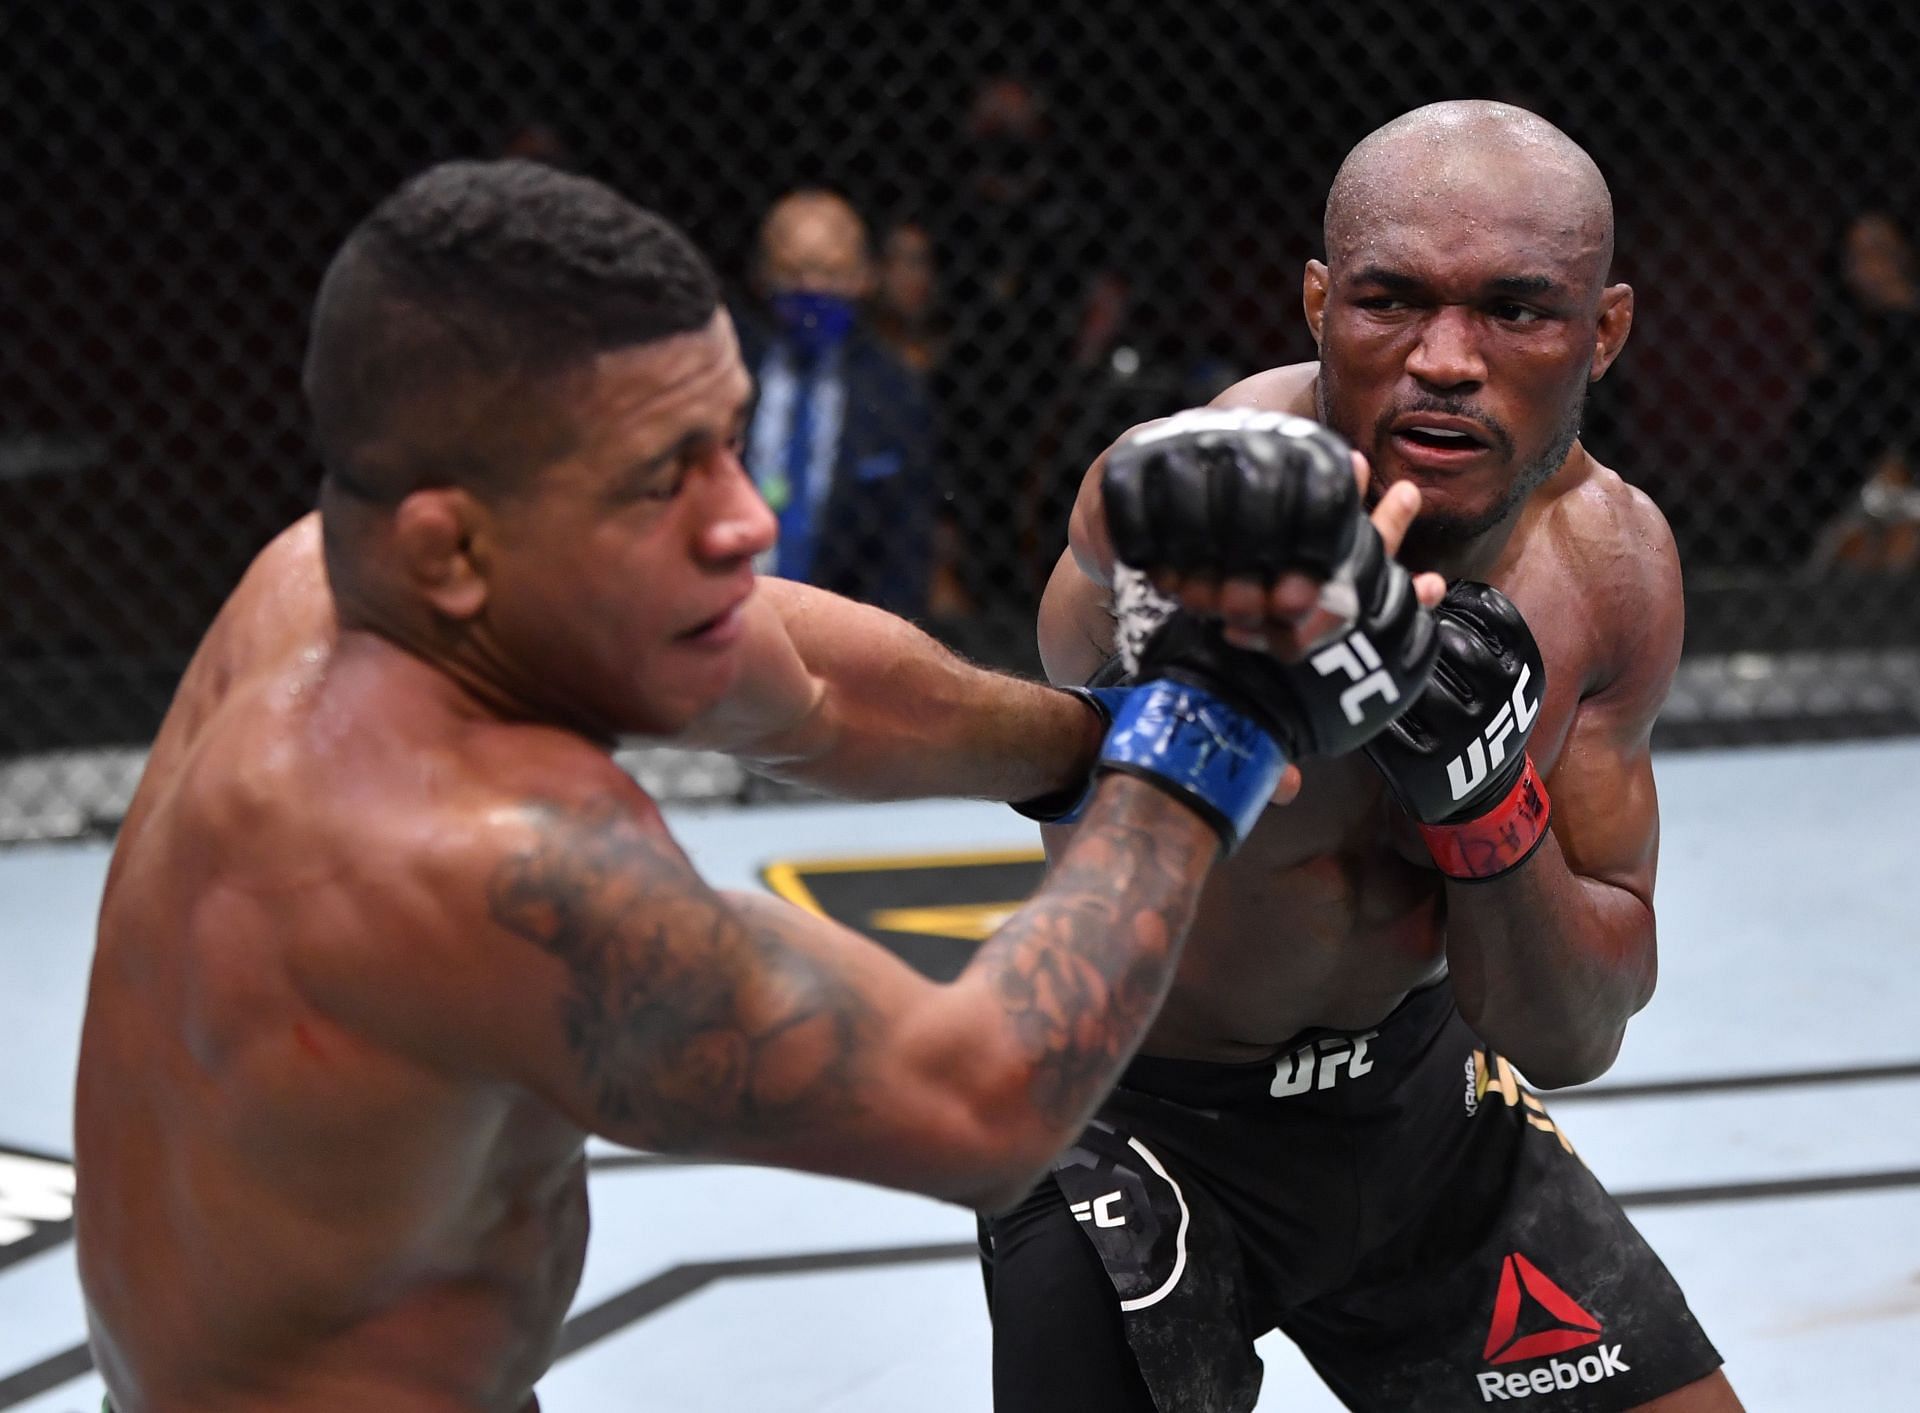 Kamaru Usman was pushed to his limits by Gilbert Burns at UFC 258